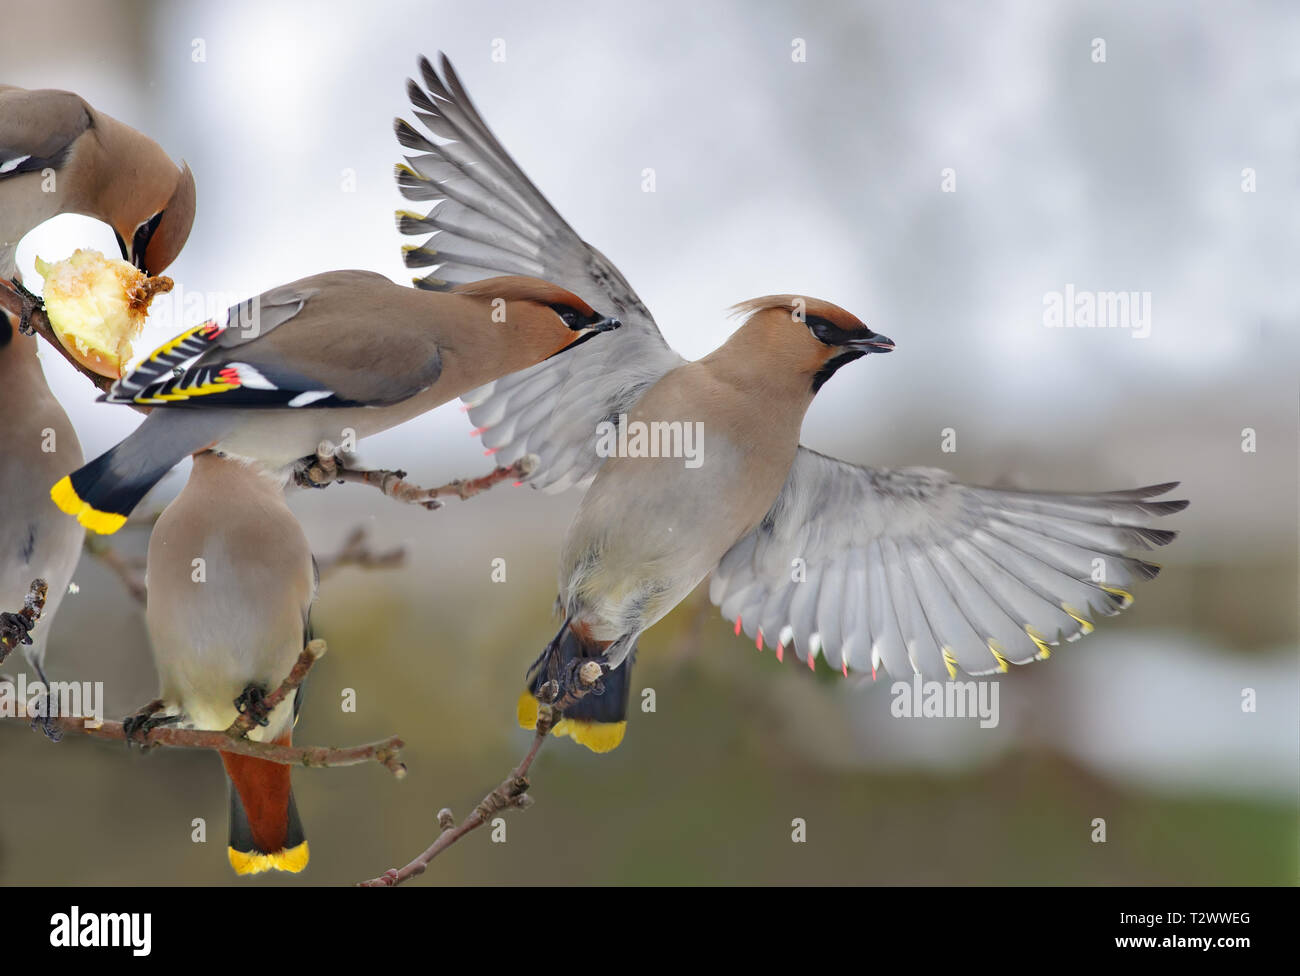 Bohemian Waxwings in conflict with one flying bird on apple tree Stock Photo